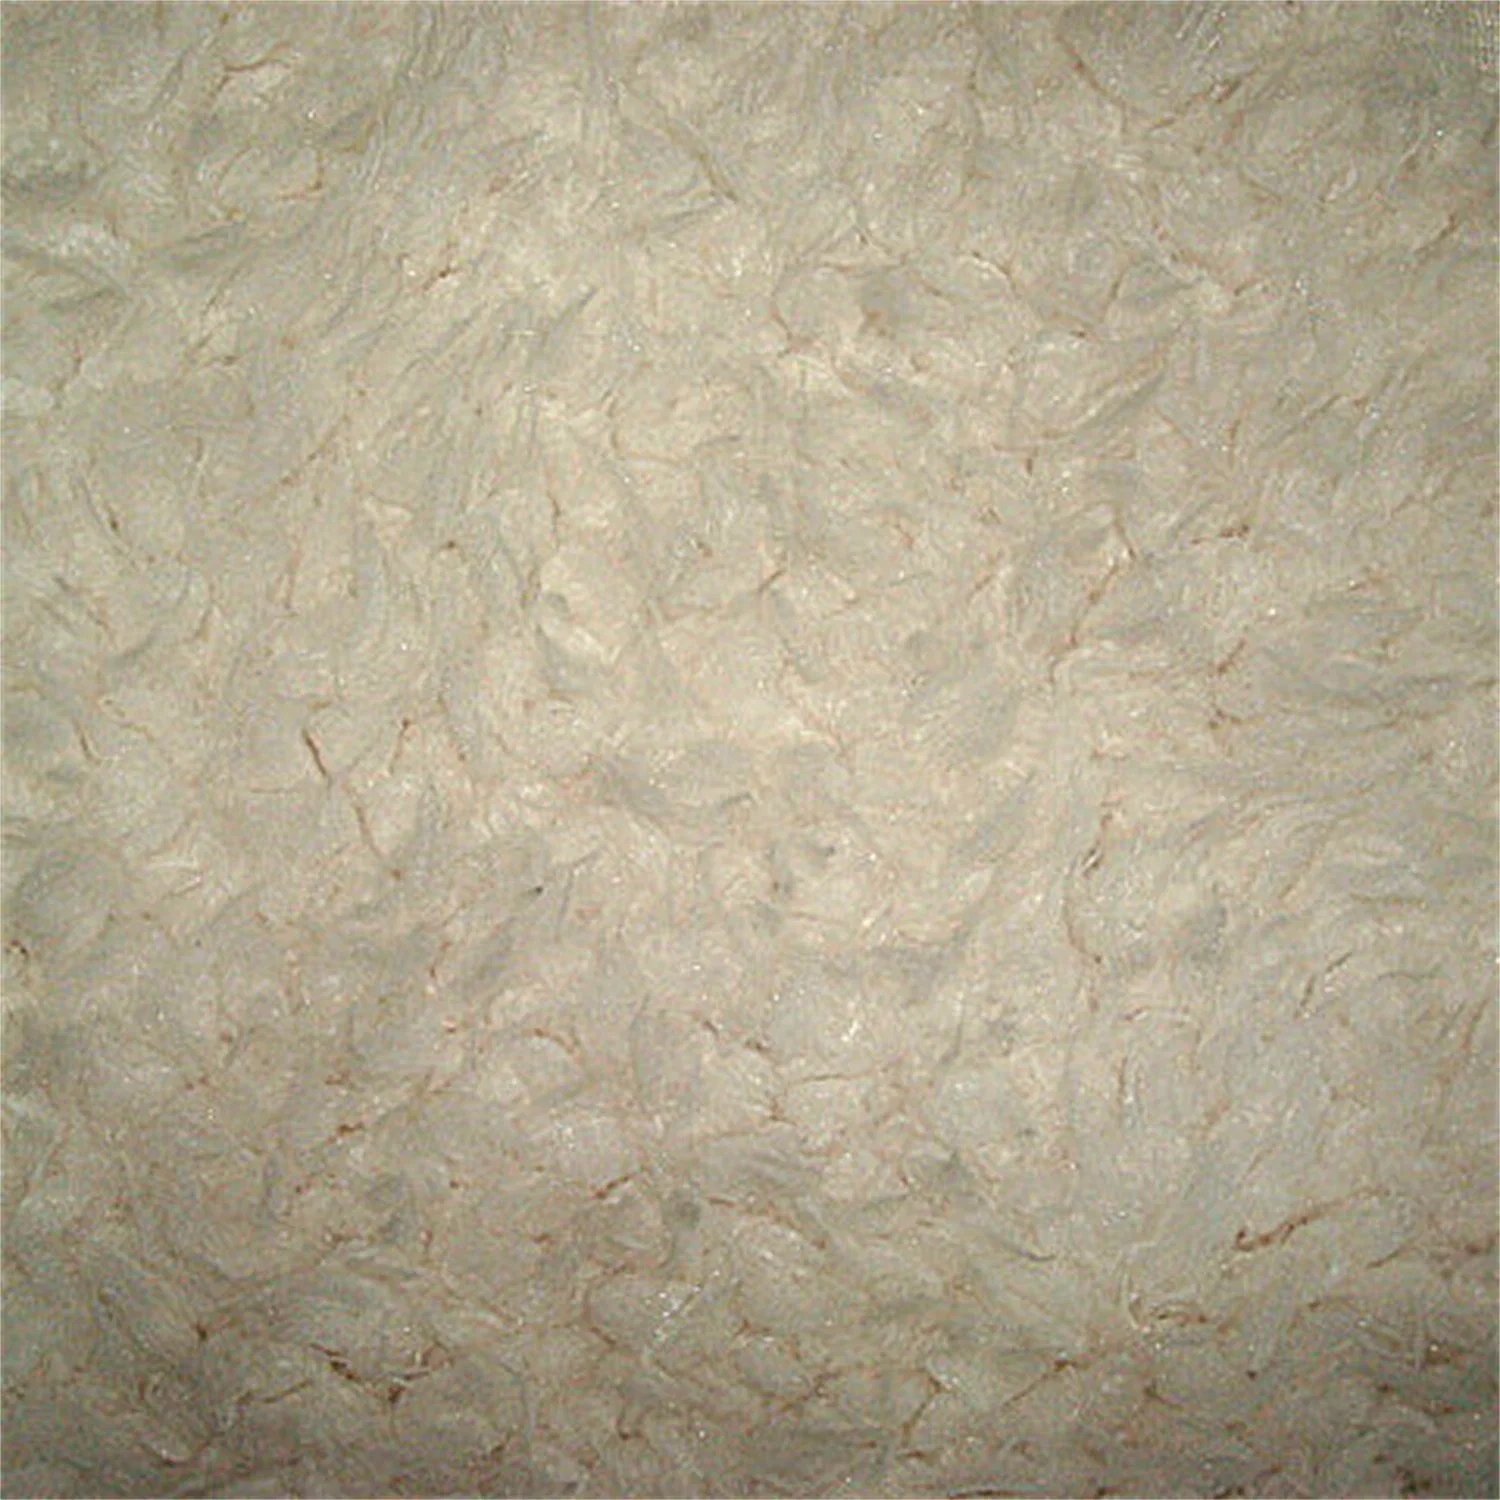 Luxury Faux Goat Hair Plush Fabric for Home Textile and Garment